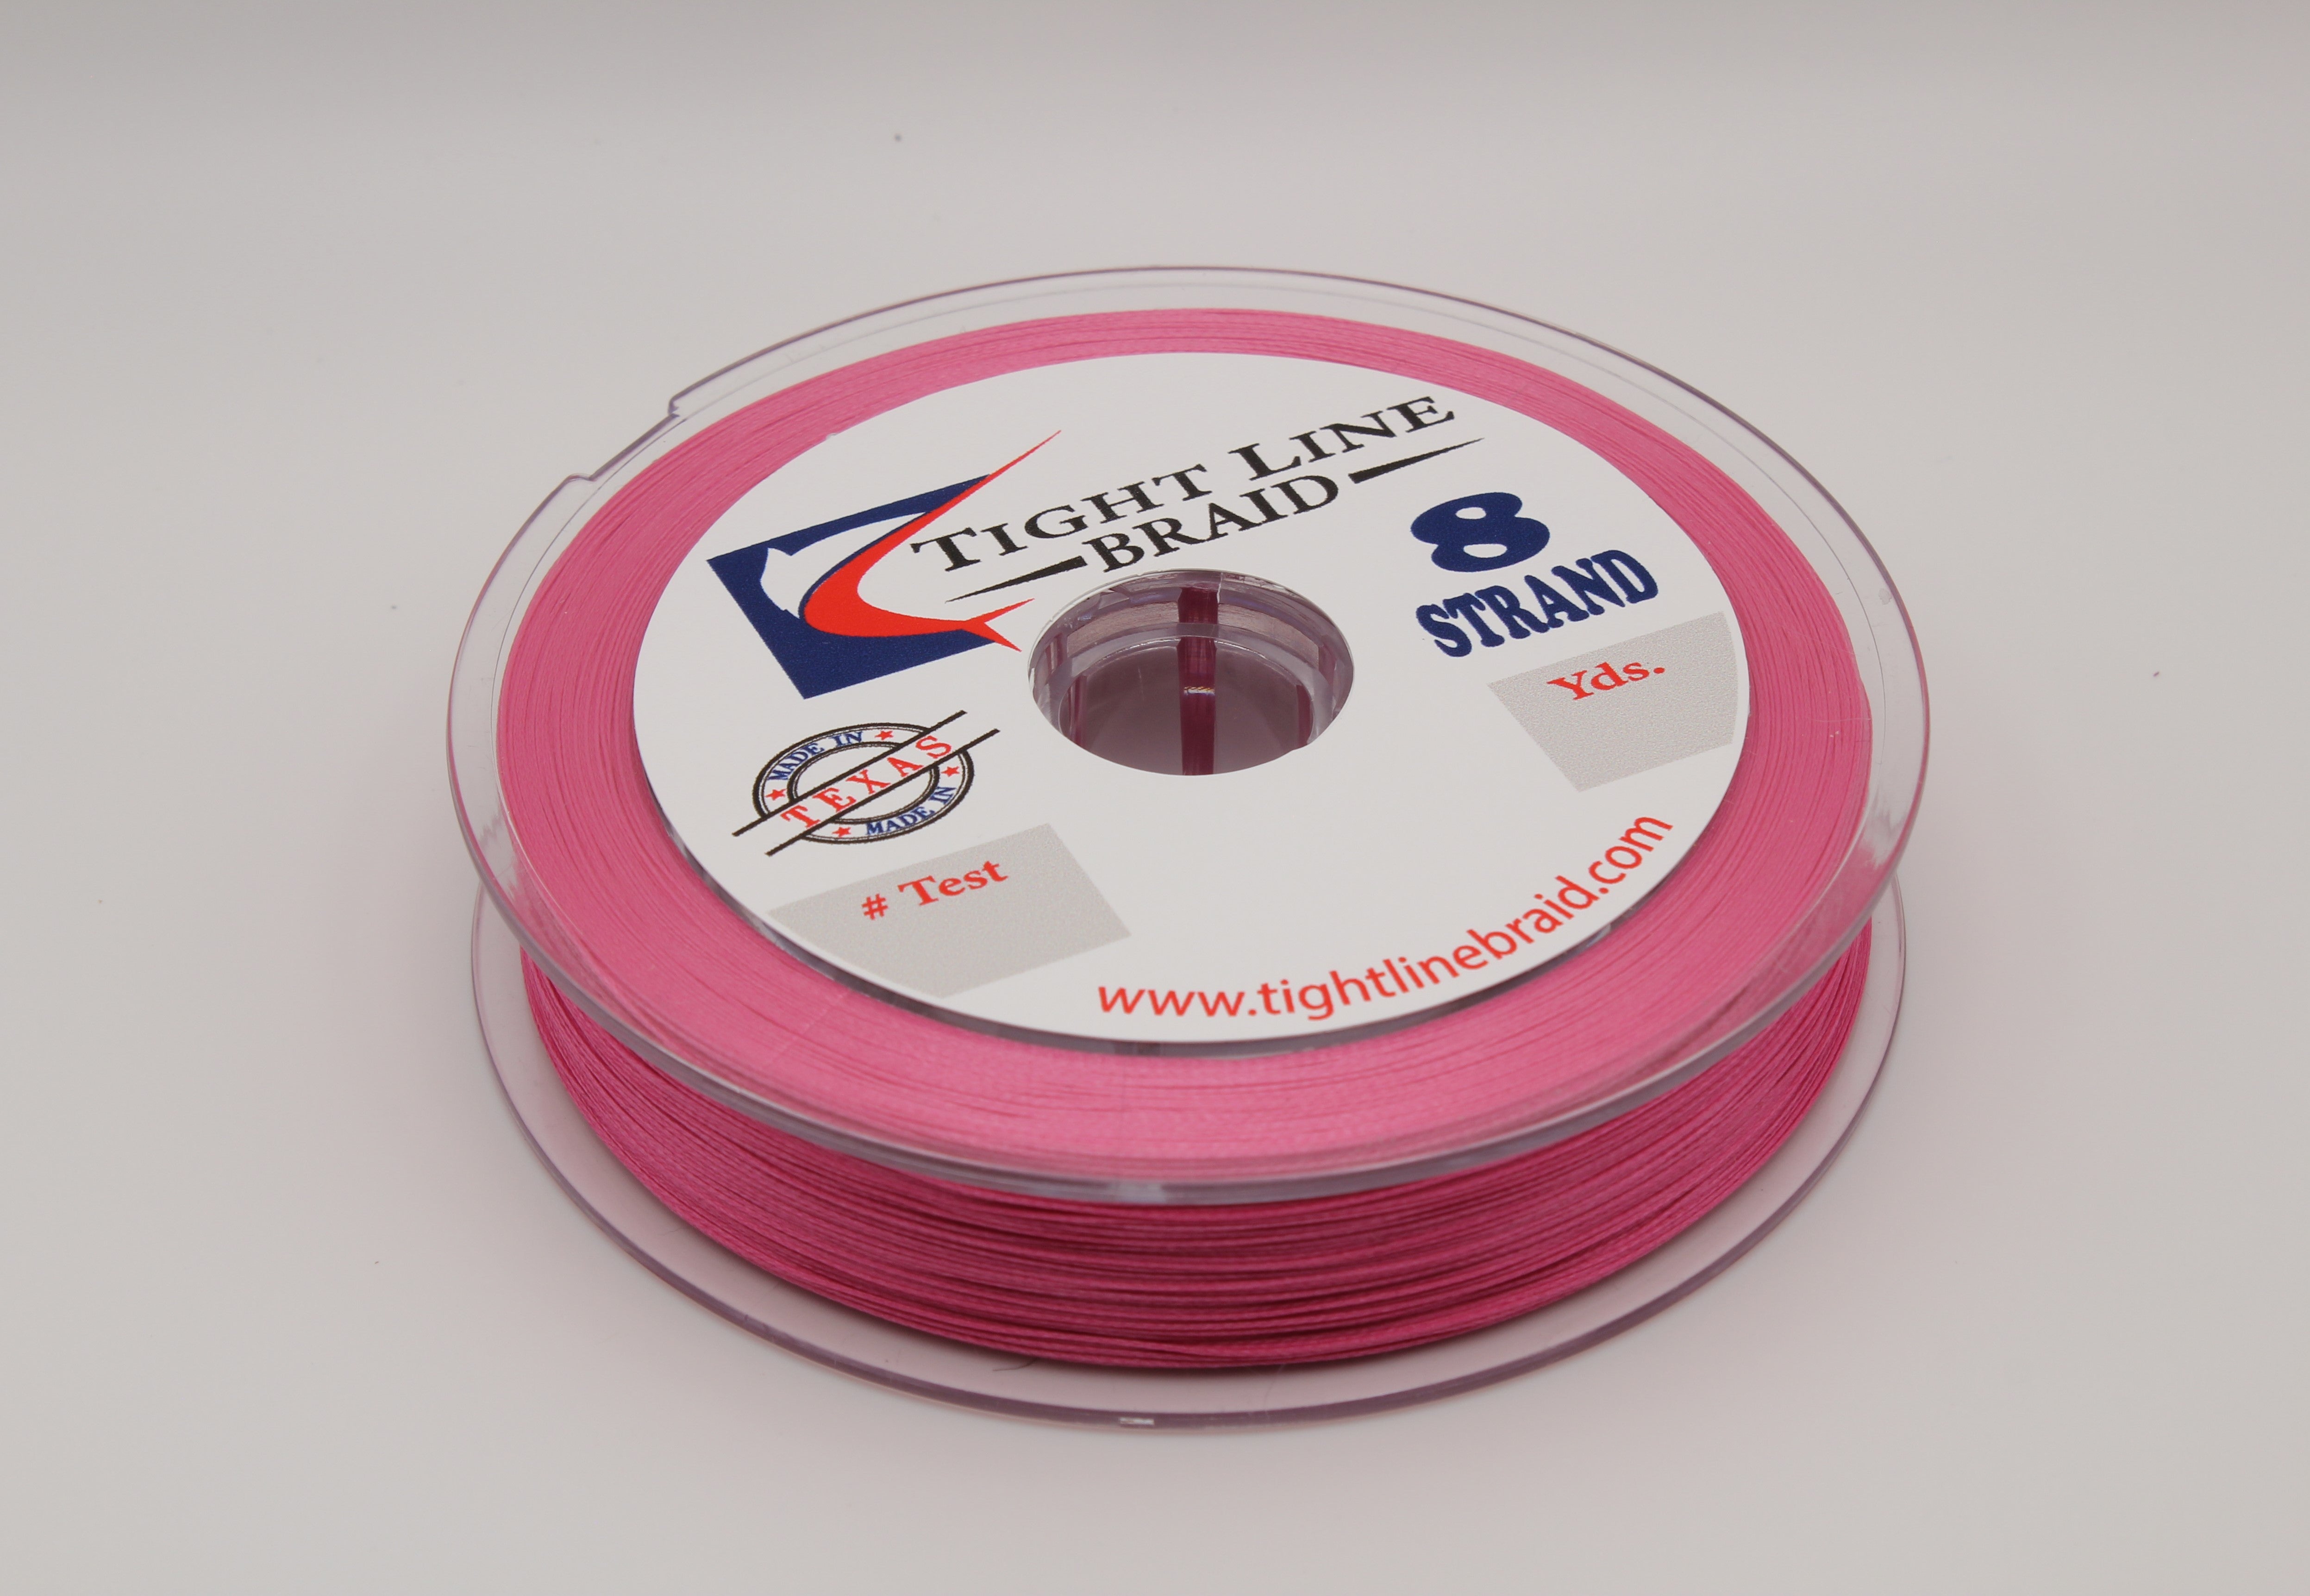 Hookers Cat Cable 8 Strand Spectra Braid Fishing line. OR&PK glow under UV  light